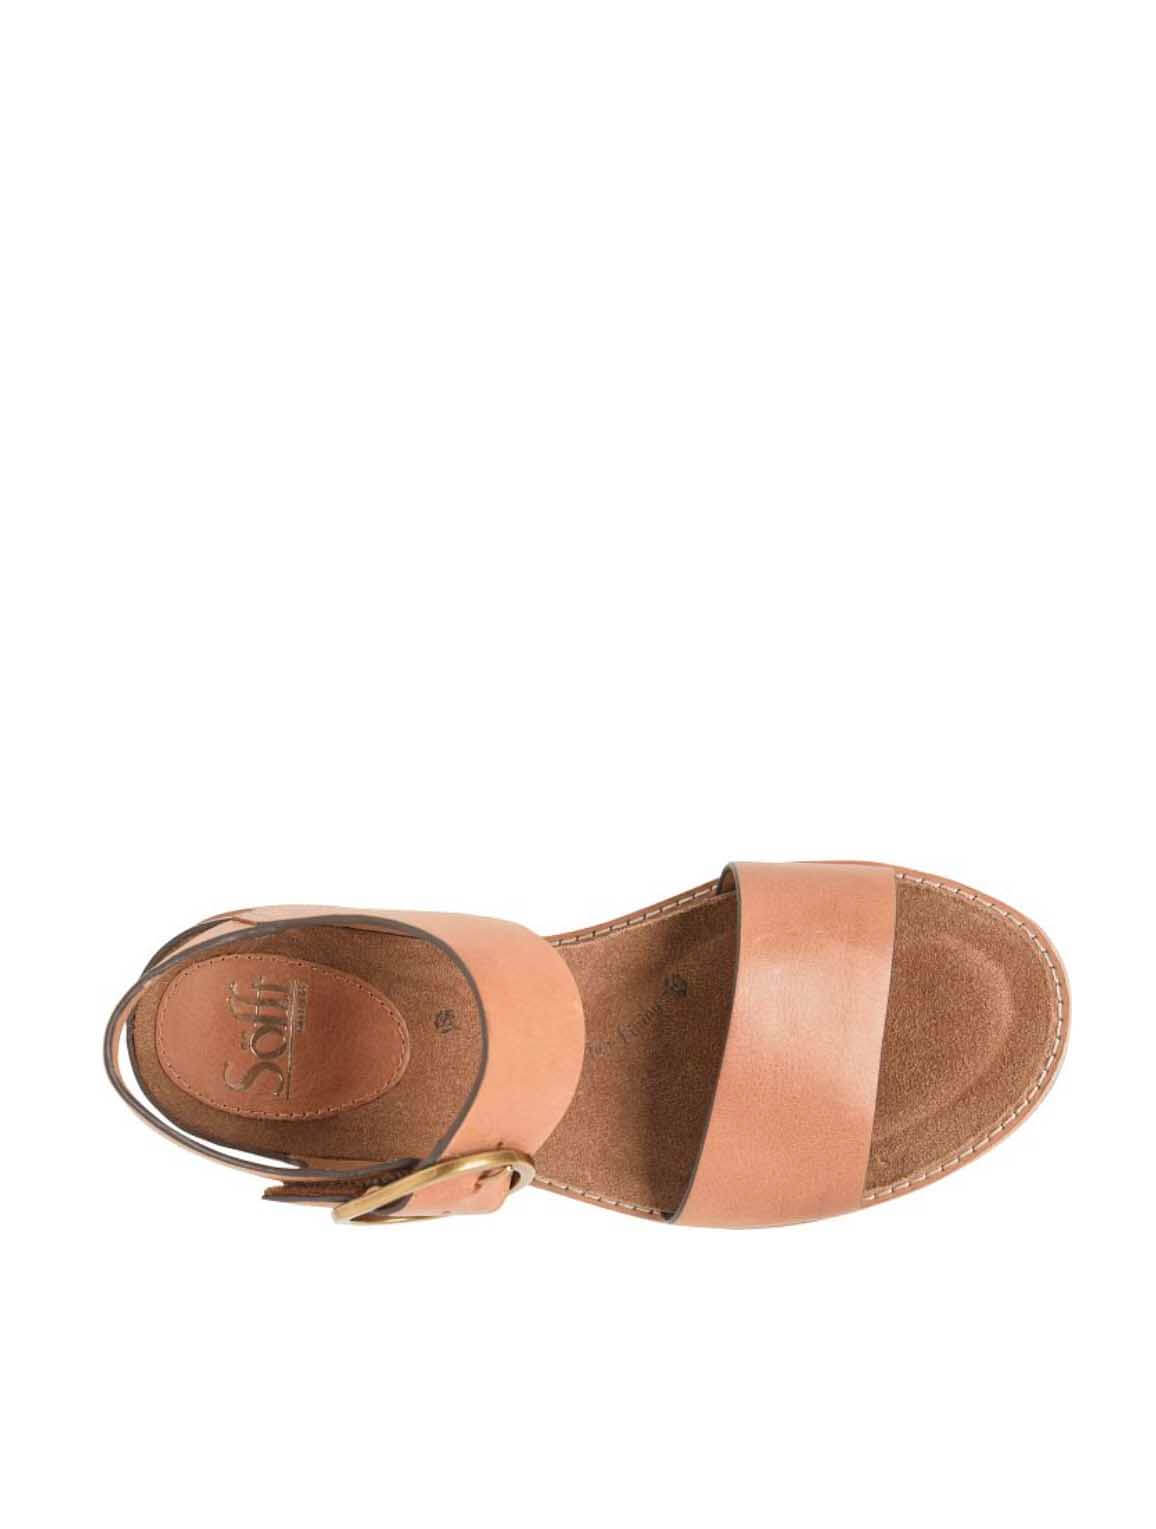 Sofft Bali Buckle Flat Sandal in Luggage